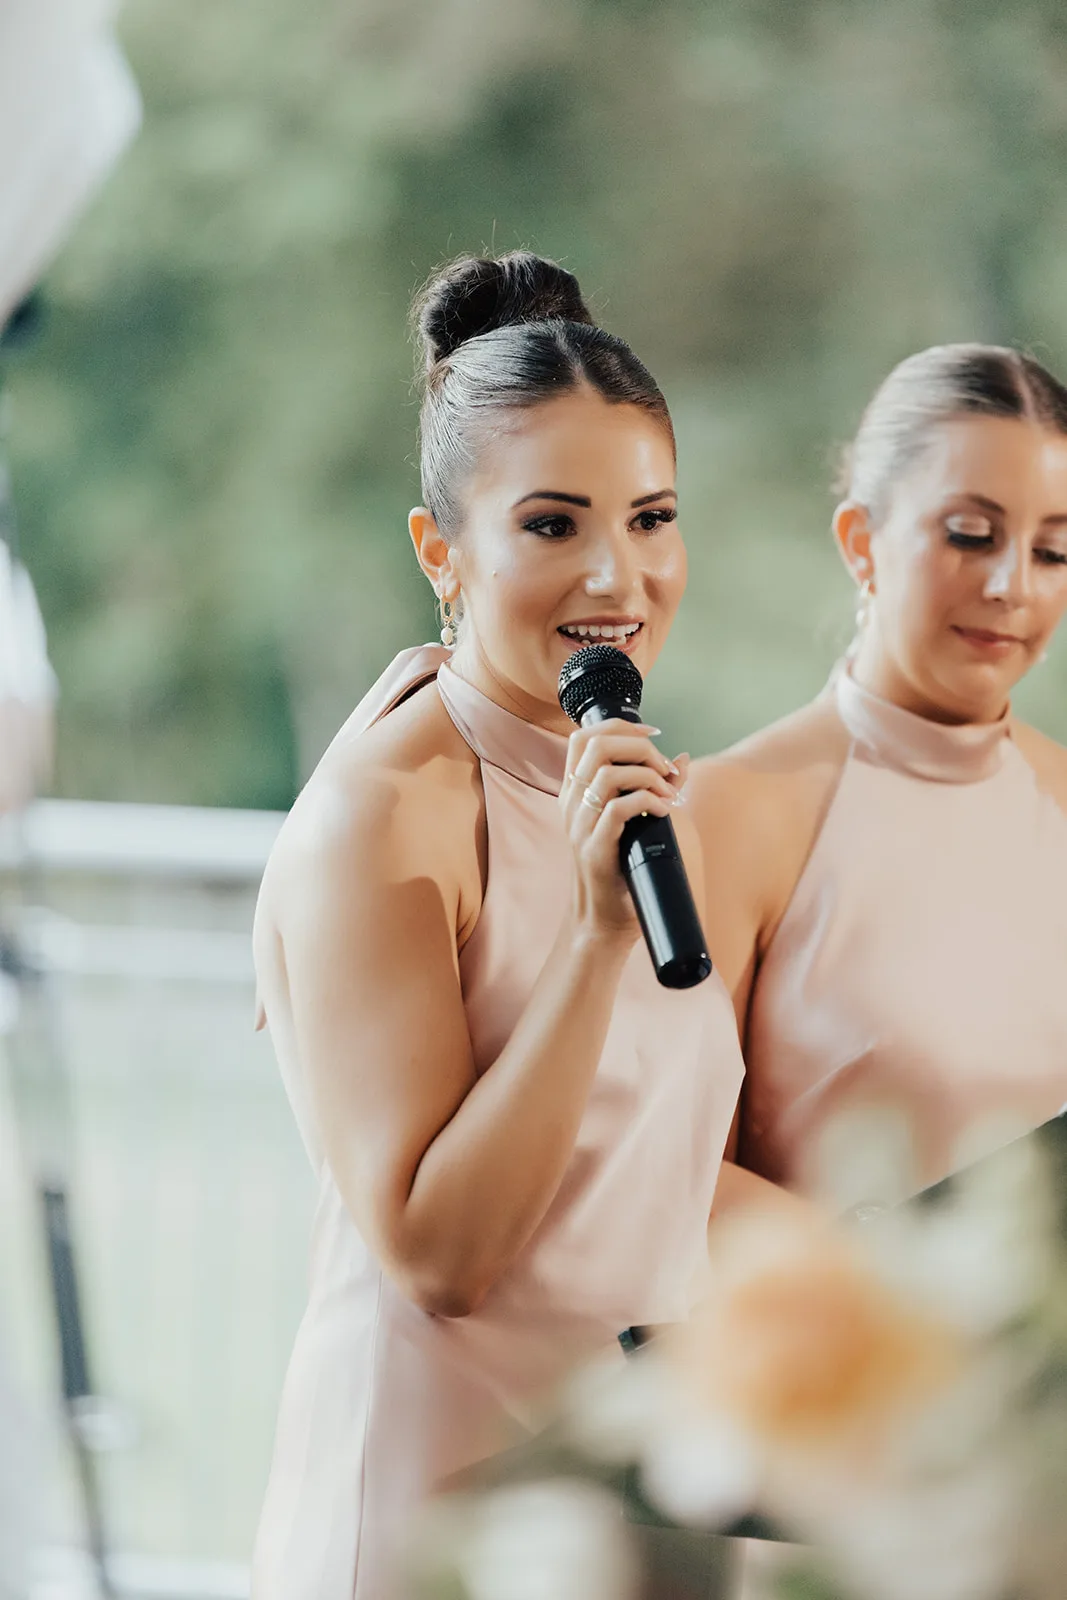 Maid of honor wedding speech at Carissa and Tyler's wedding, Nomad by NK Photography